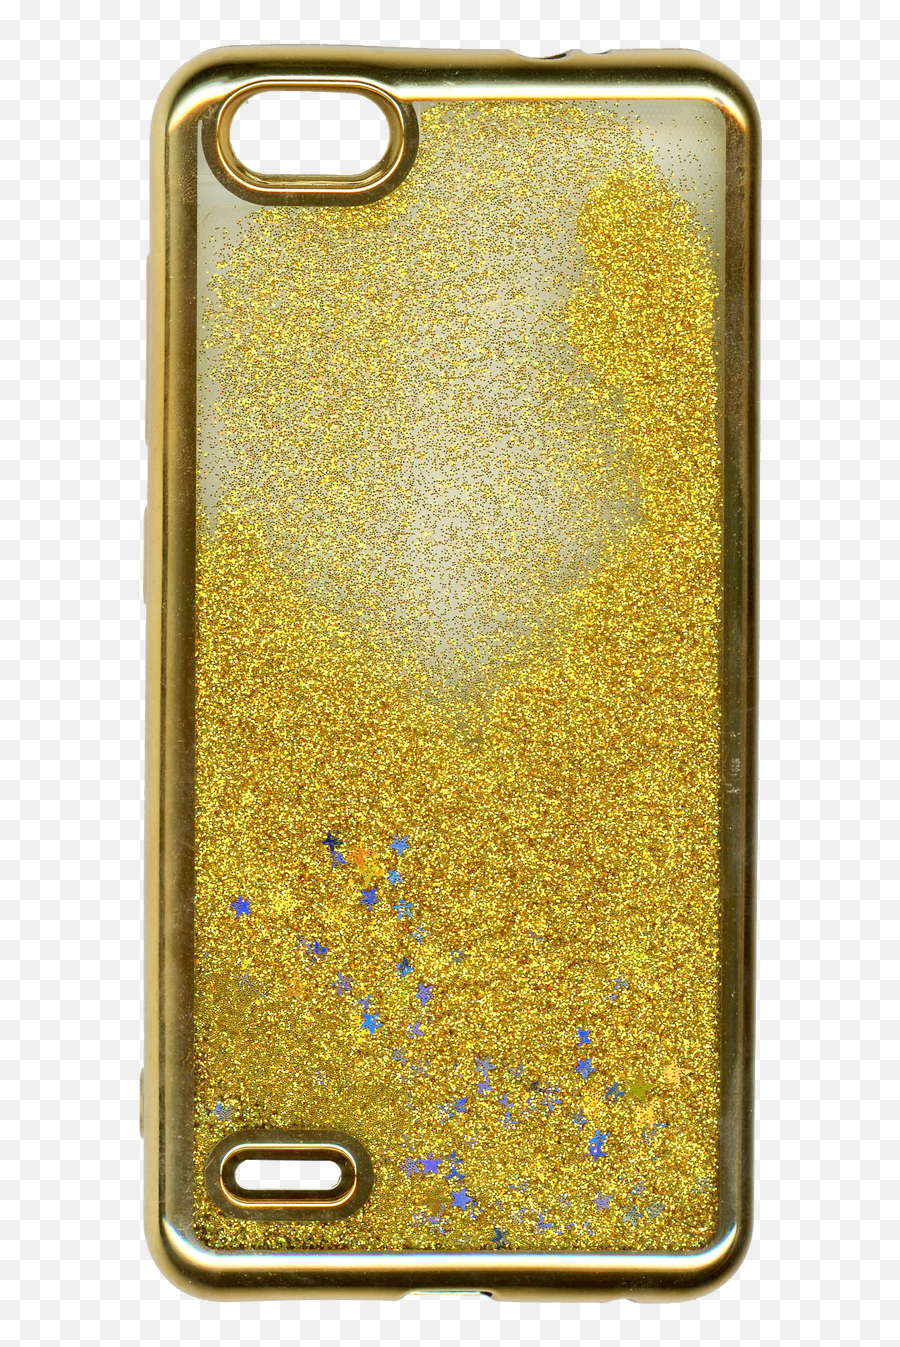 Zte Blade Force Mm Electroplated Water Glitter Case With Stars Gold - Mobile Phone Case Emoji,Glitter Force Logo